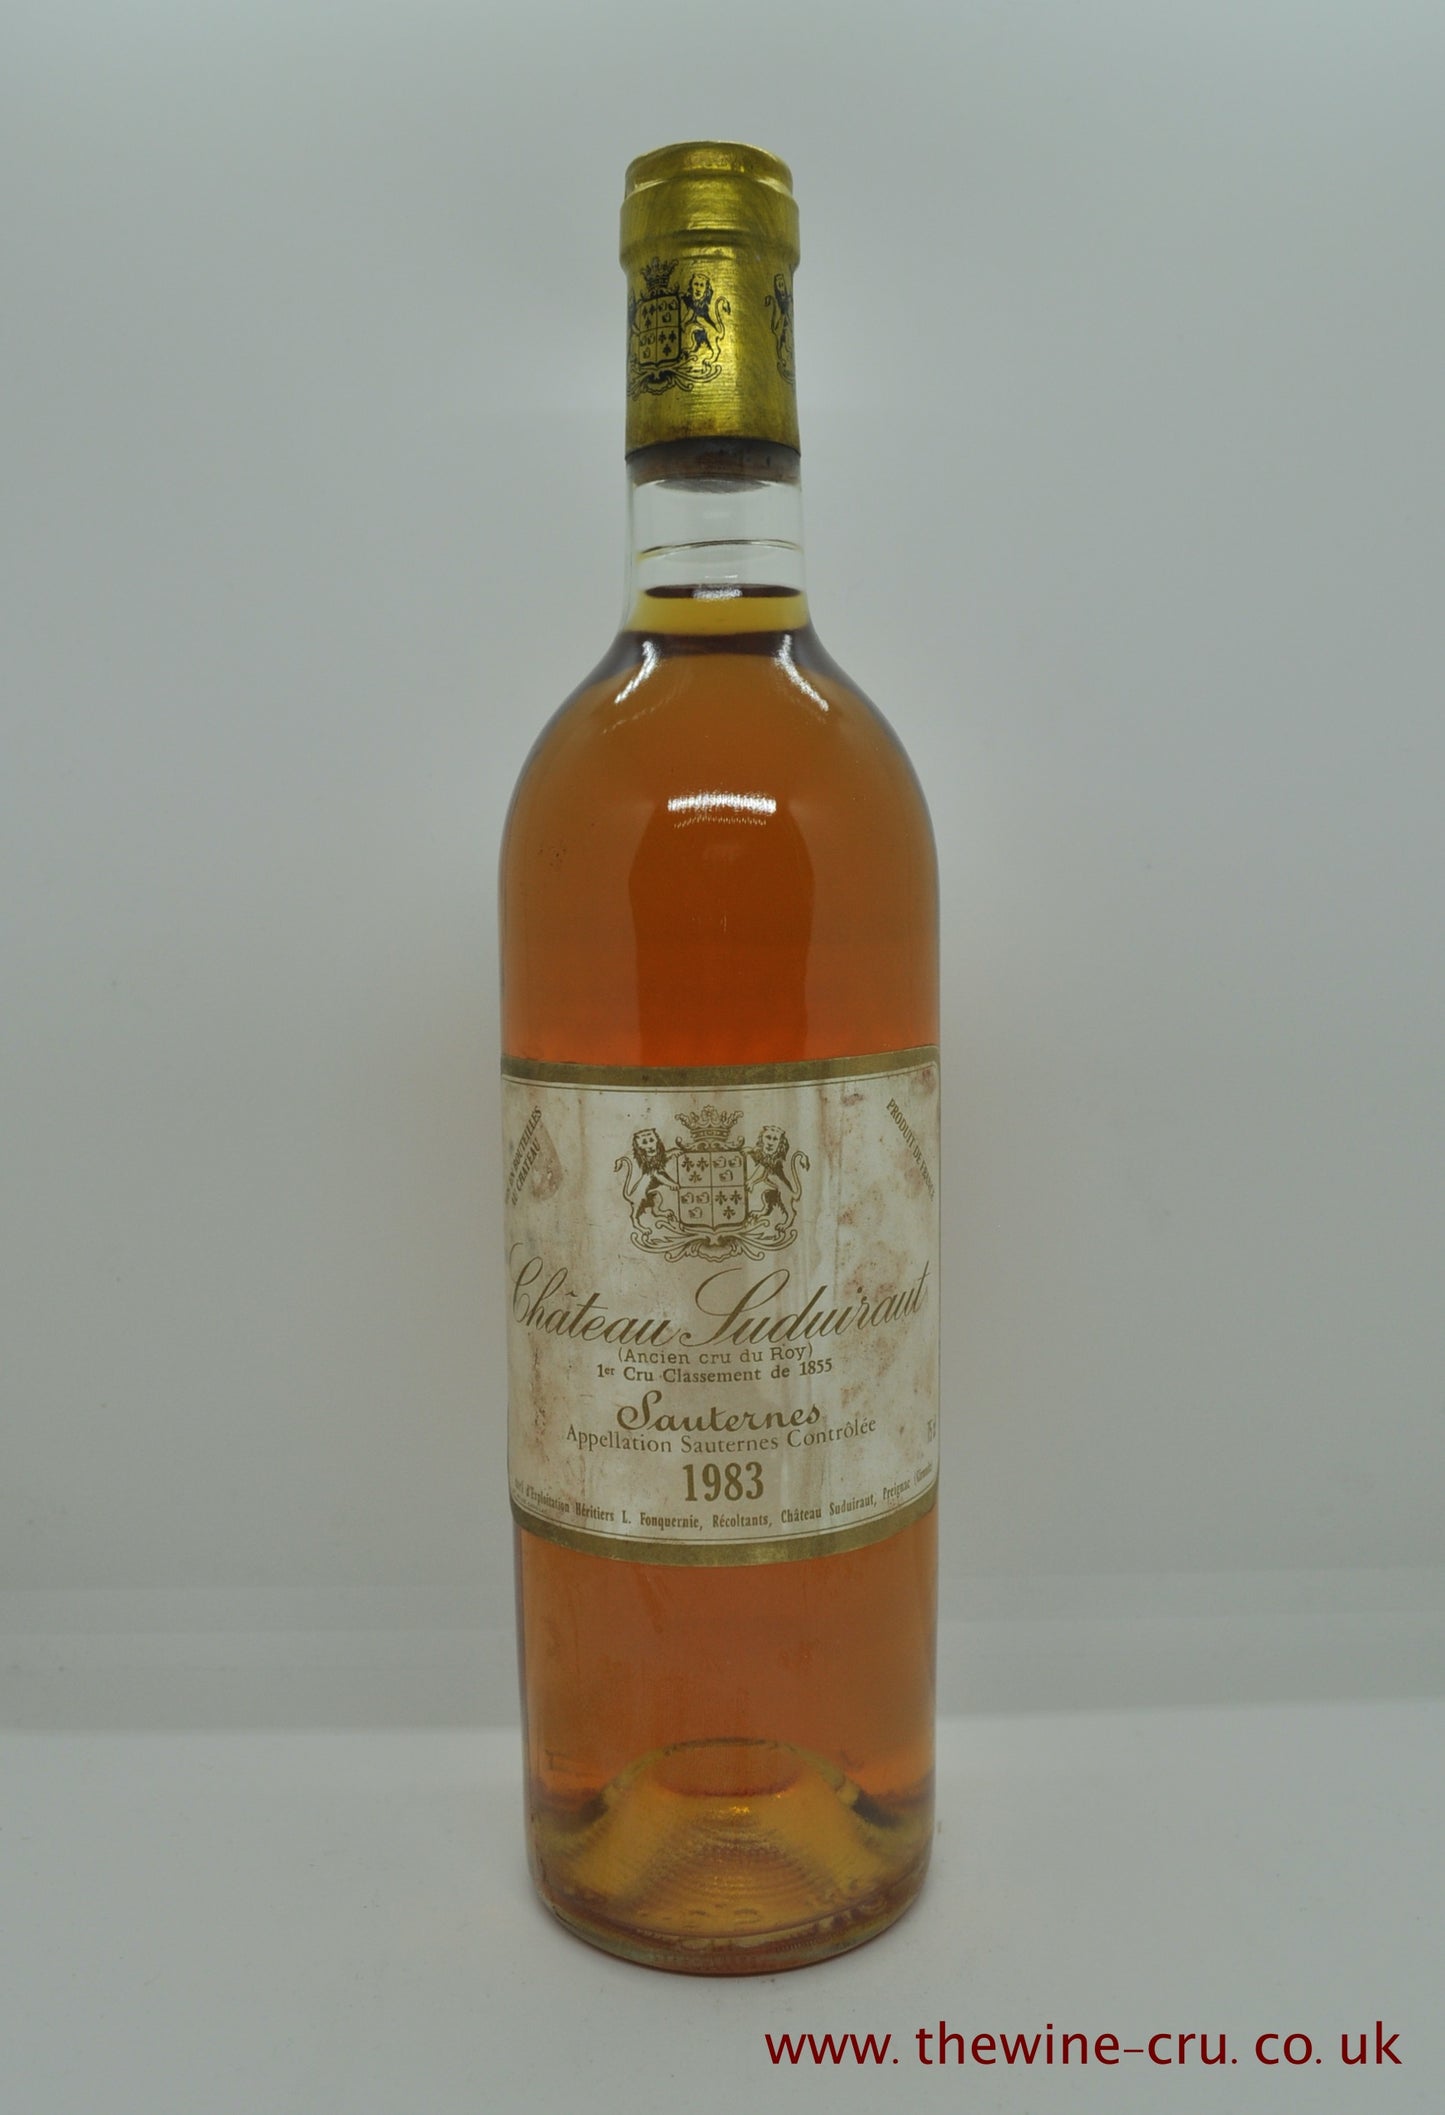 1983 vintage white wine. Chateau Suduiraut 1983. France Bordeaux. Immediate delivery. Free local delivery. Gift wrapping available.